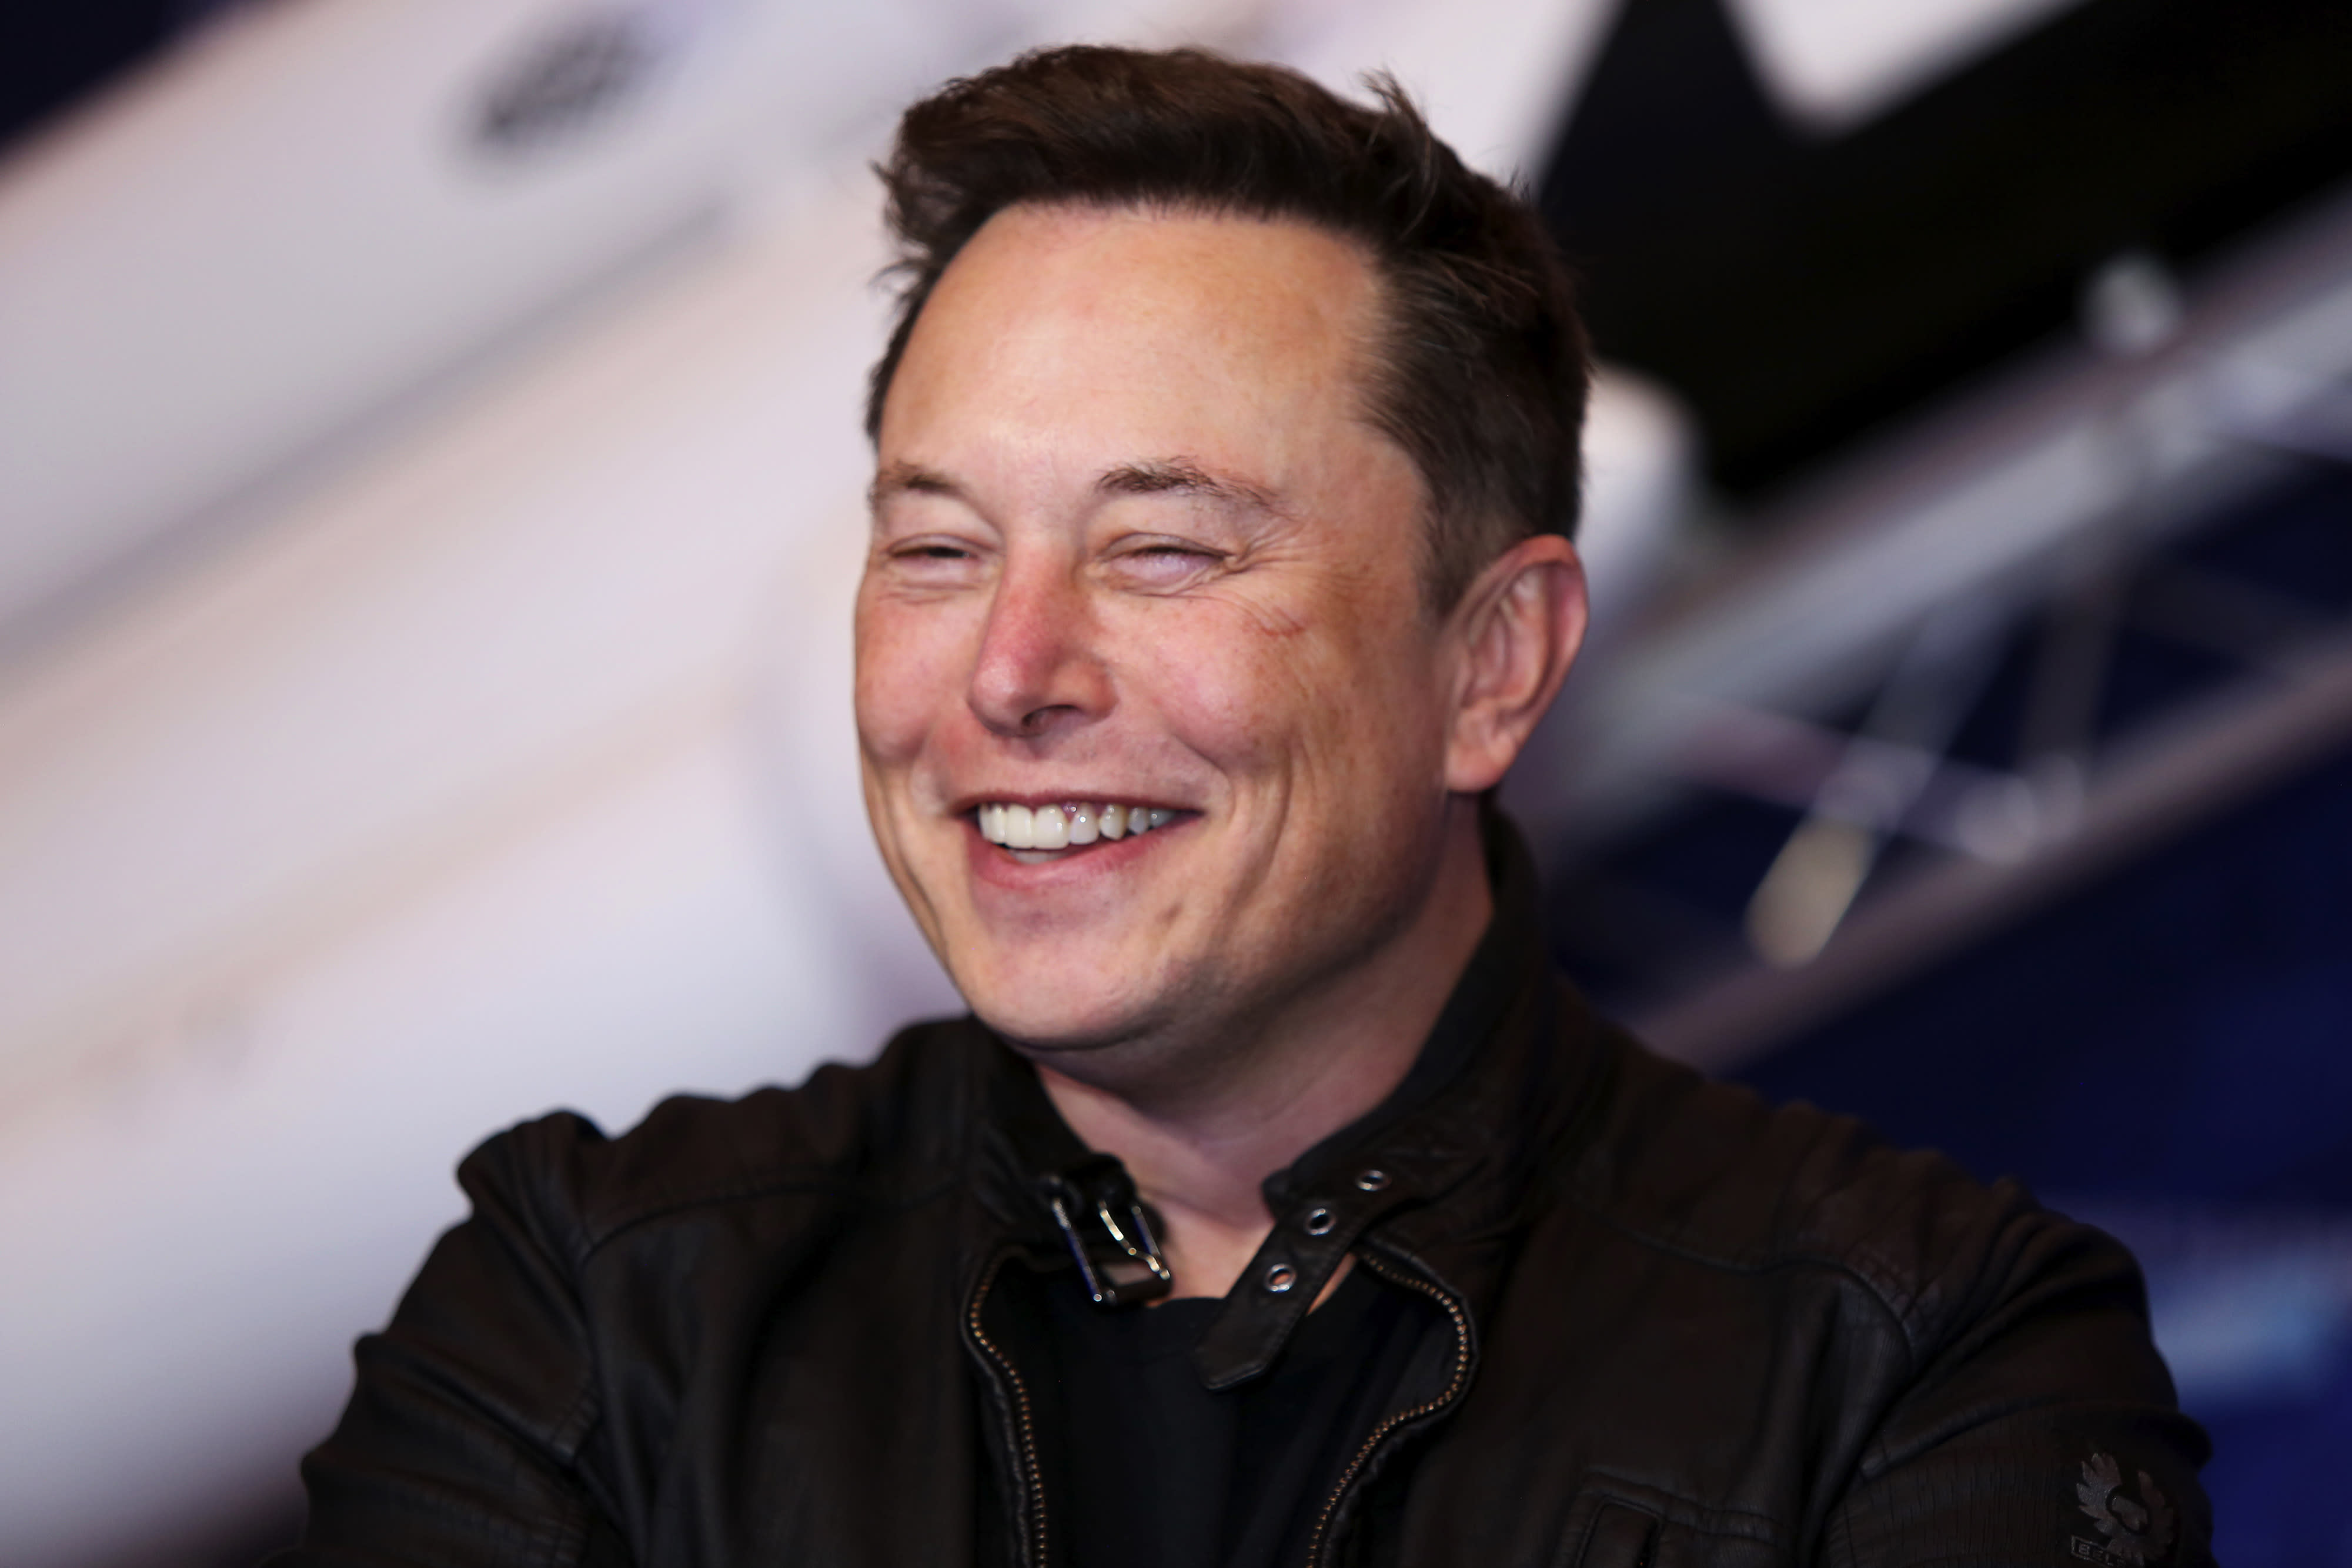 Tesla enters the S&P 500 with a 1.69% benchmark share, the fifth largest